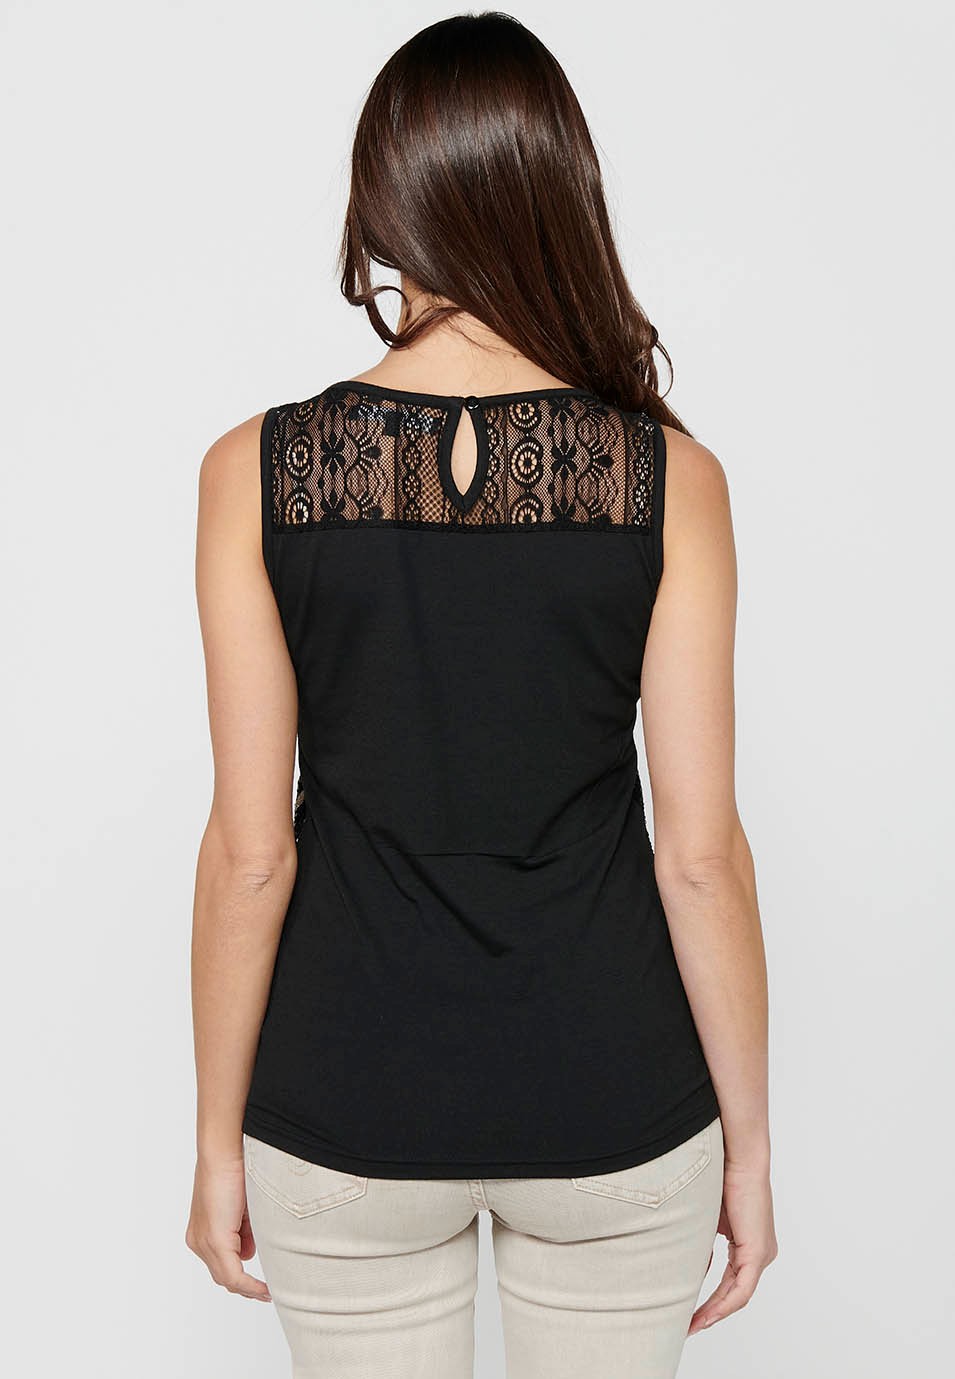 Sleeveless T-shirt with embroidered and sequined front details in Black for Women 5